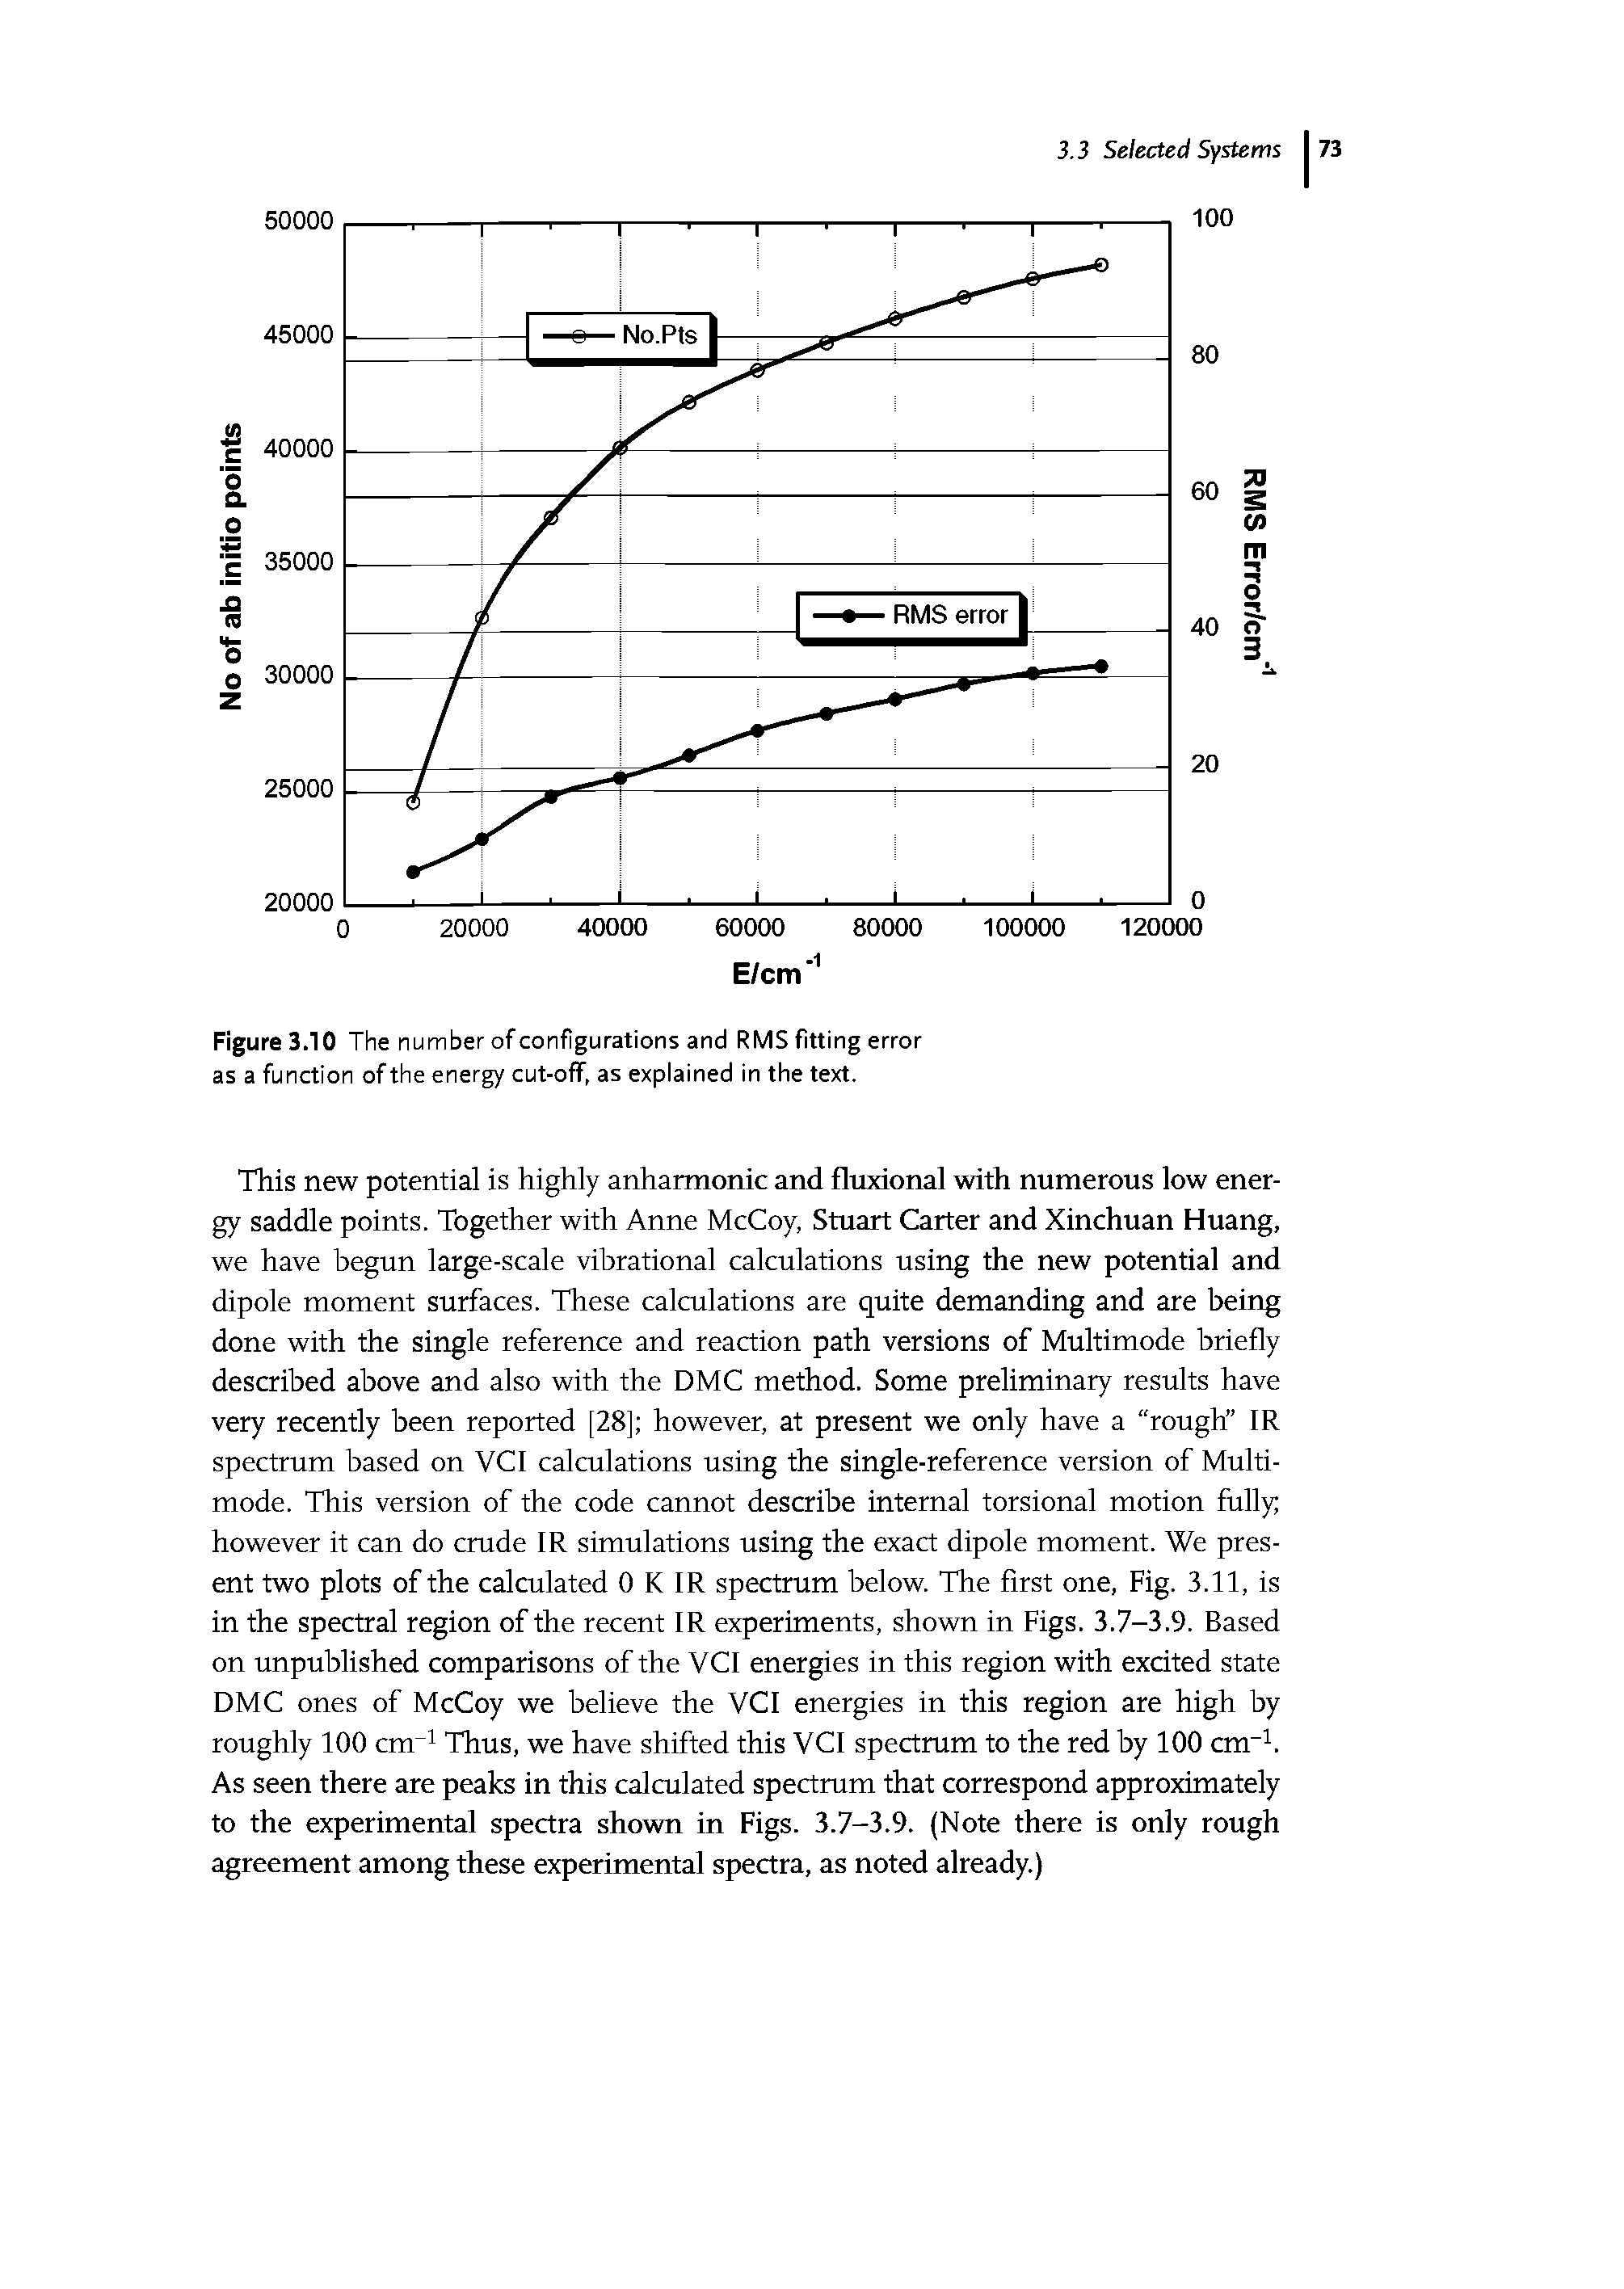 Figure 3.10 The number of configurations and RMS fitting error as a function of the energy cut-off, as explained in the text.